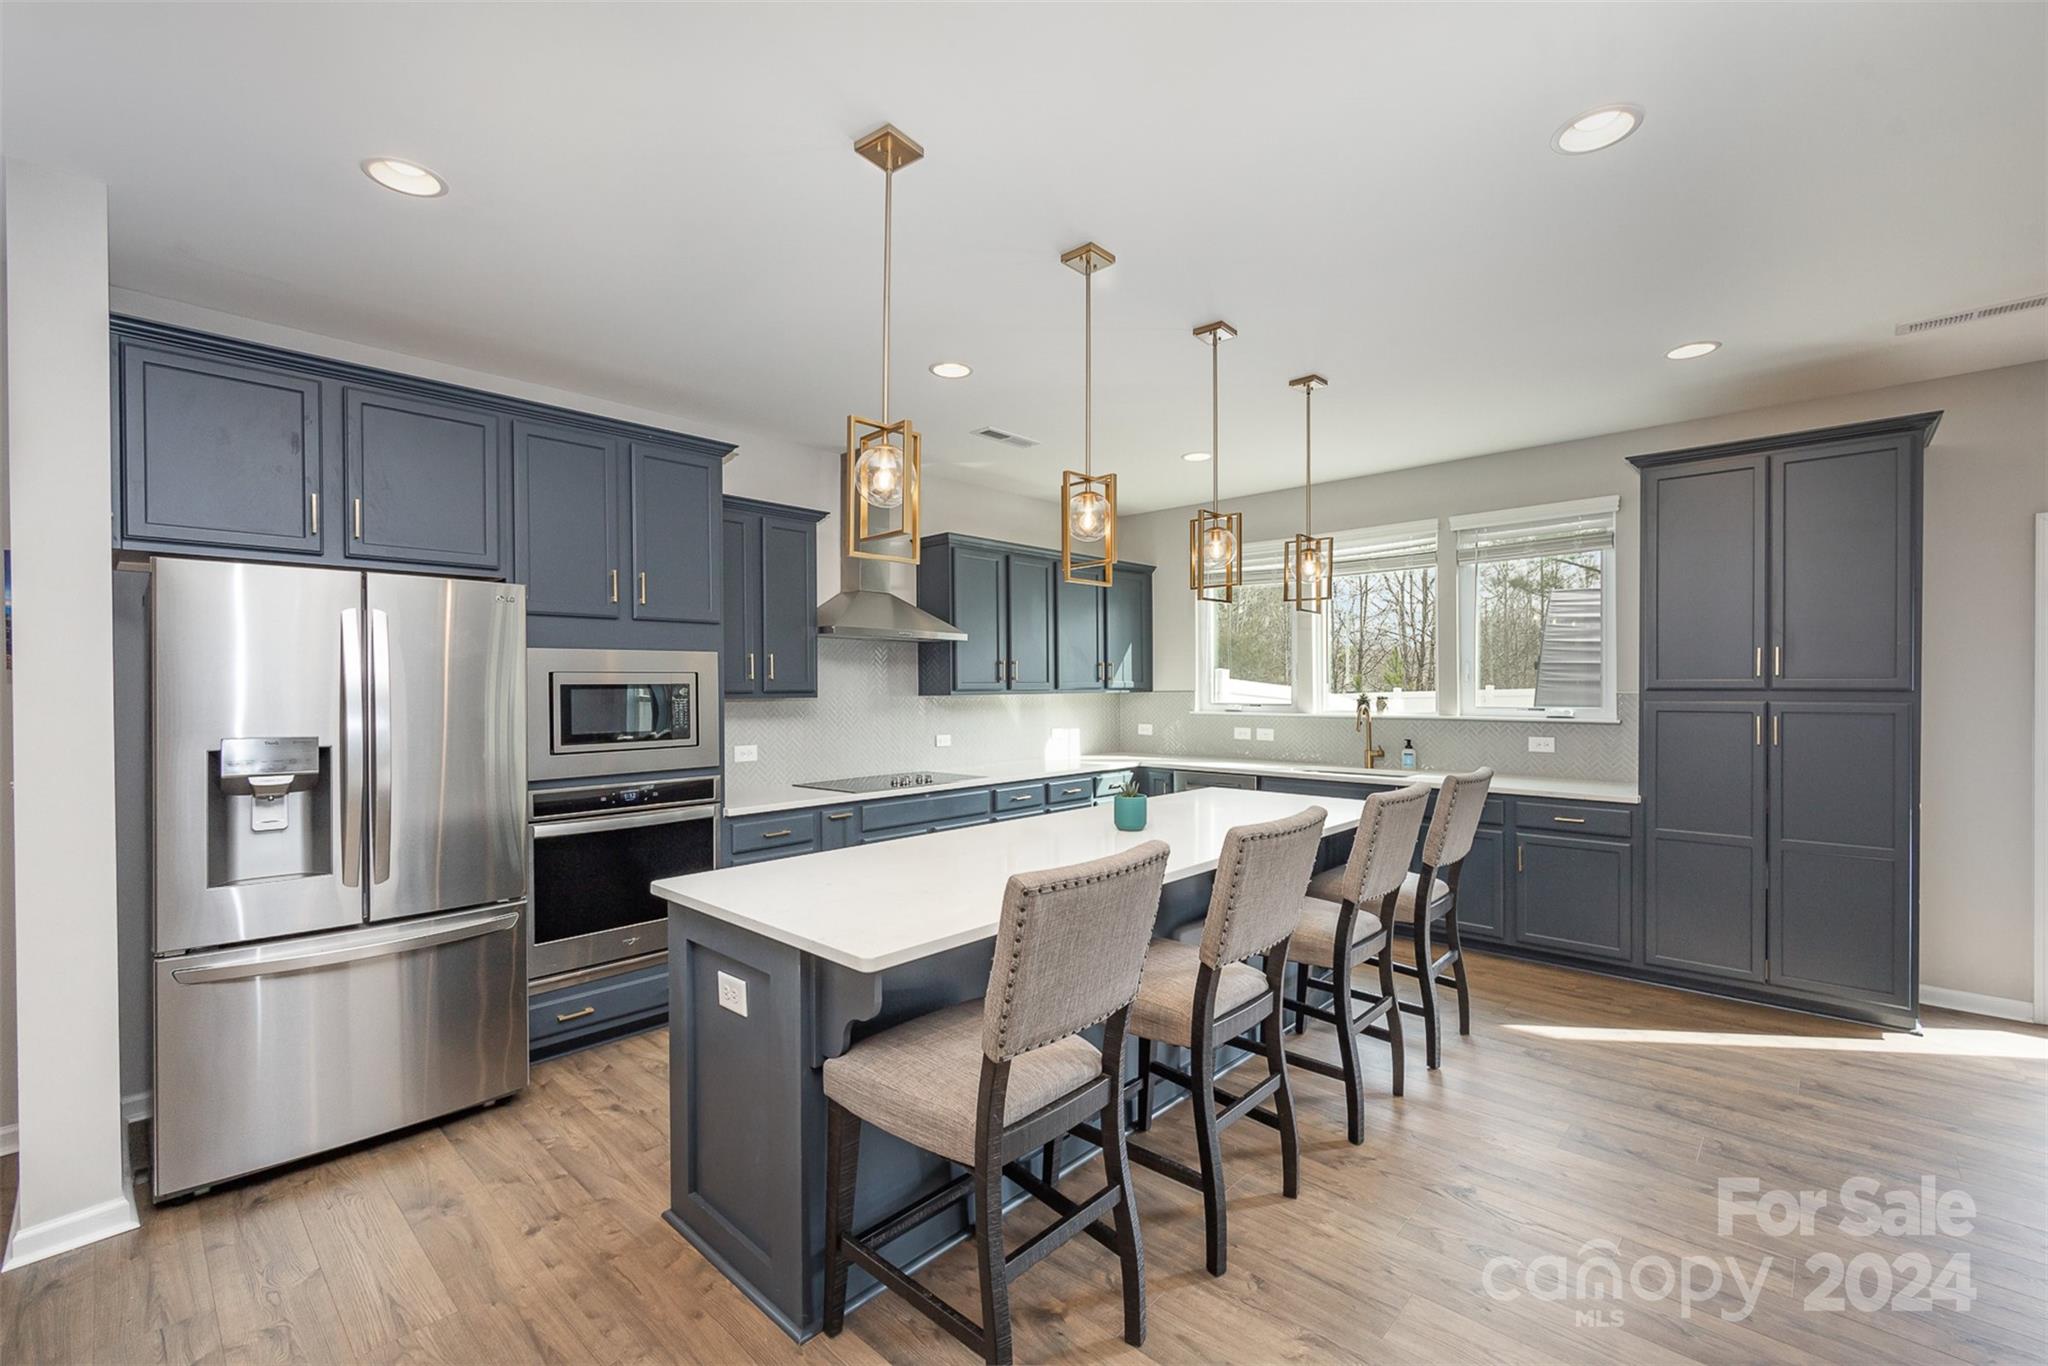 a kitchen with stainless steel appliances a dining table chairs a refrigerator and cabinets